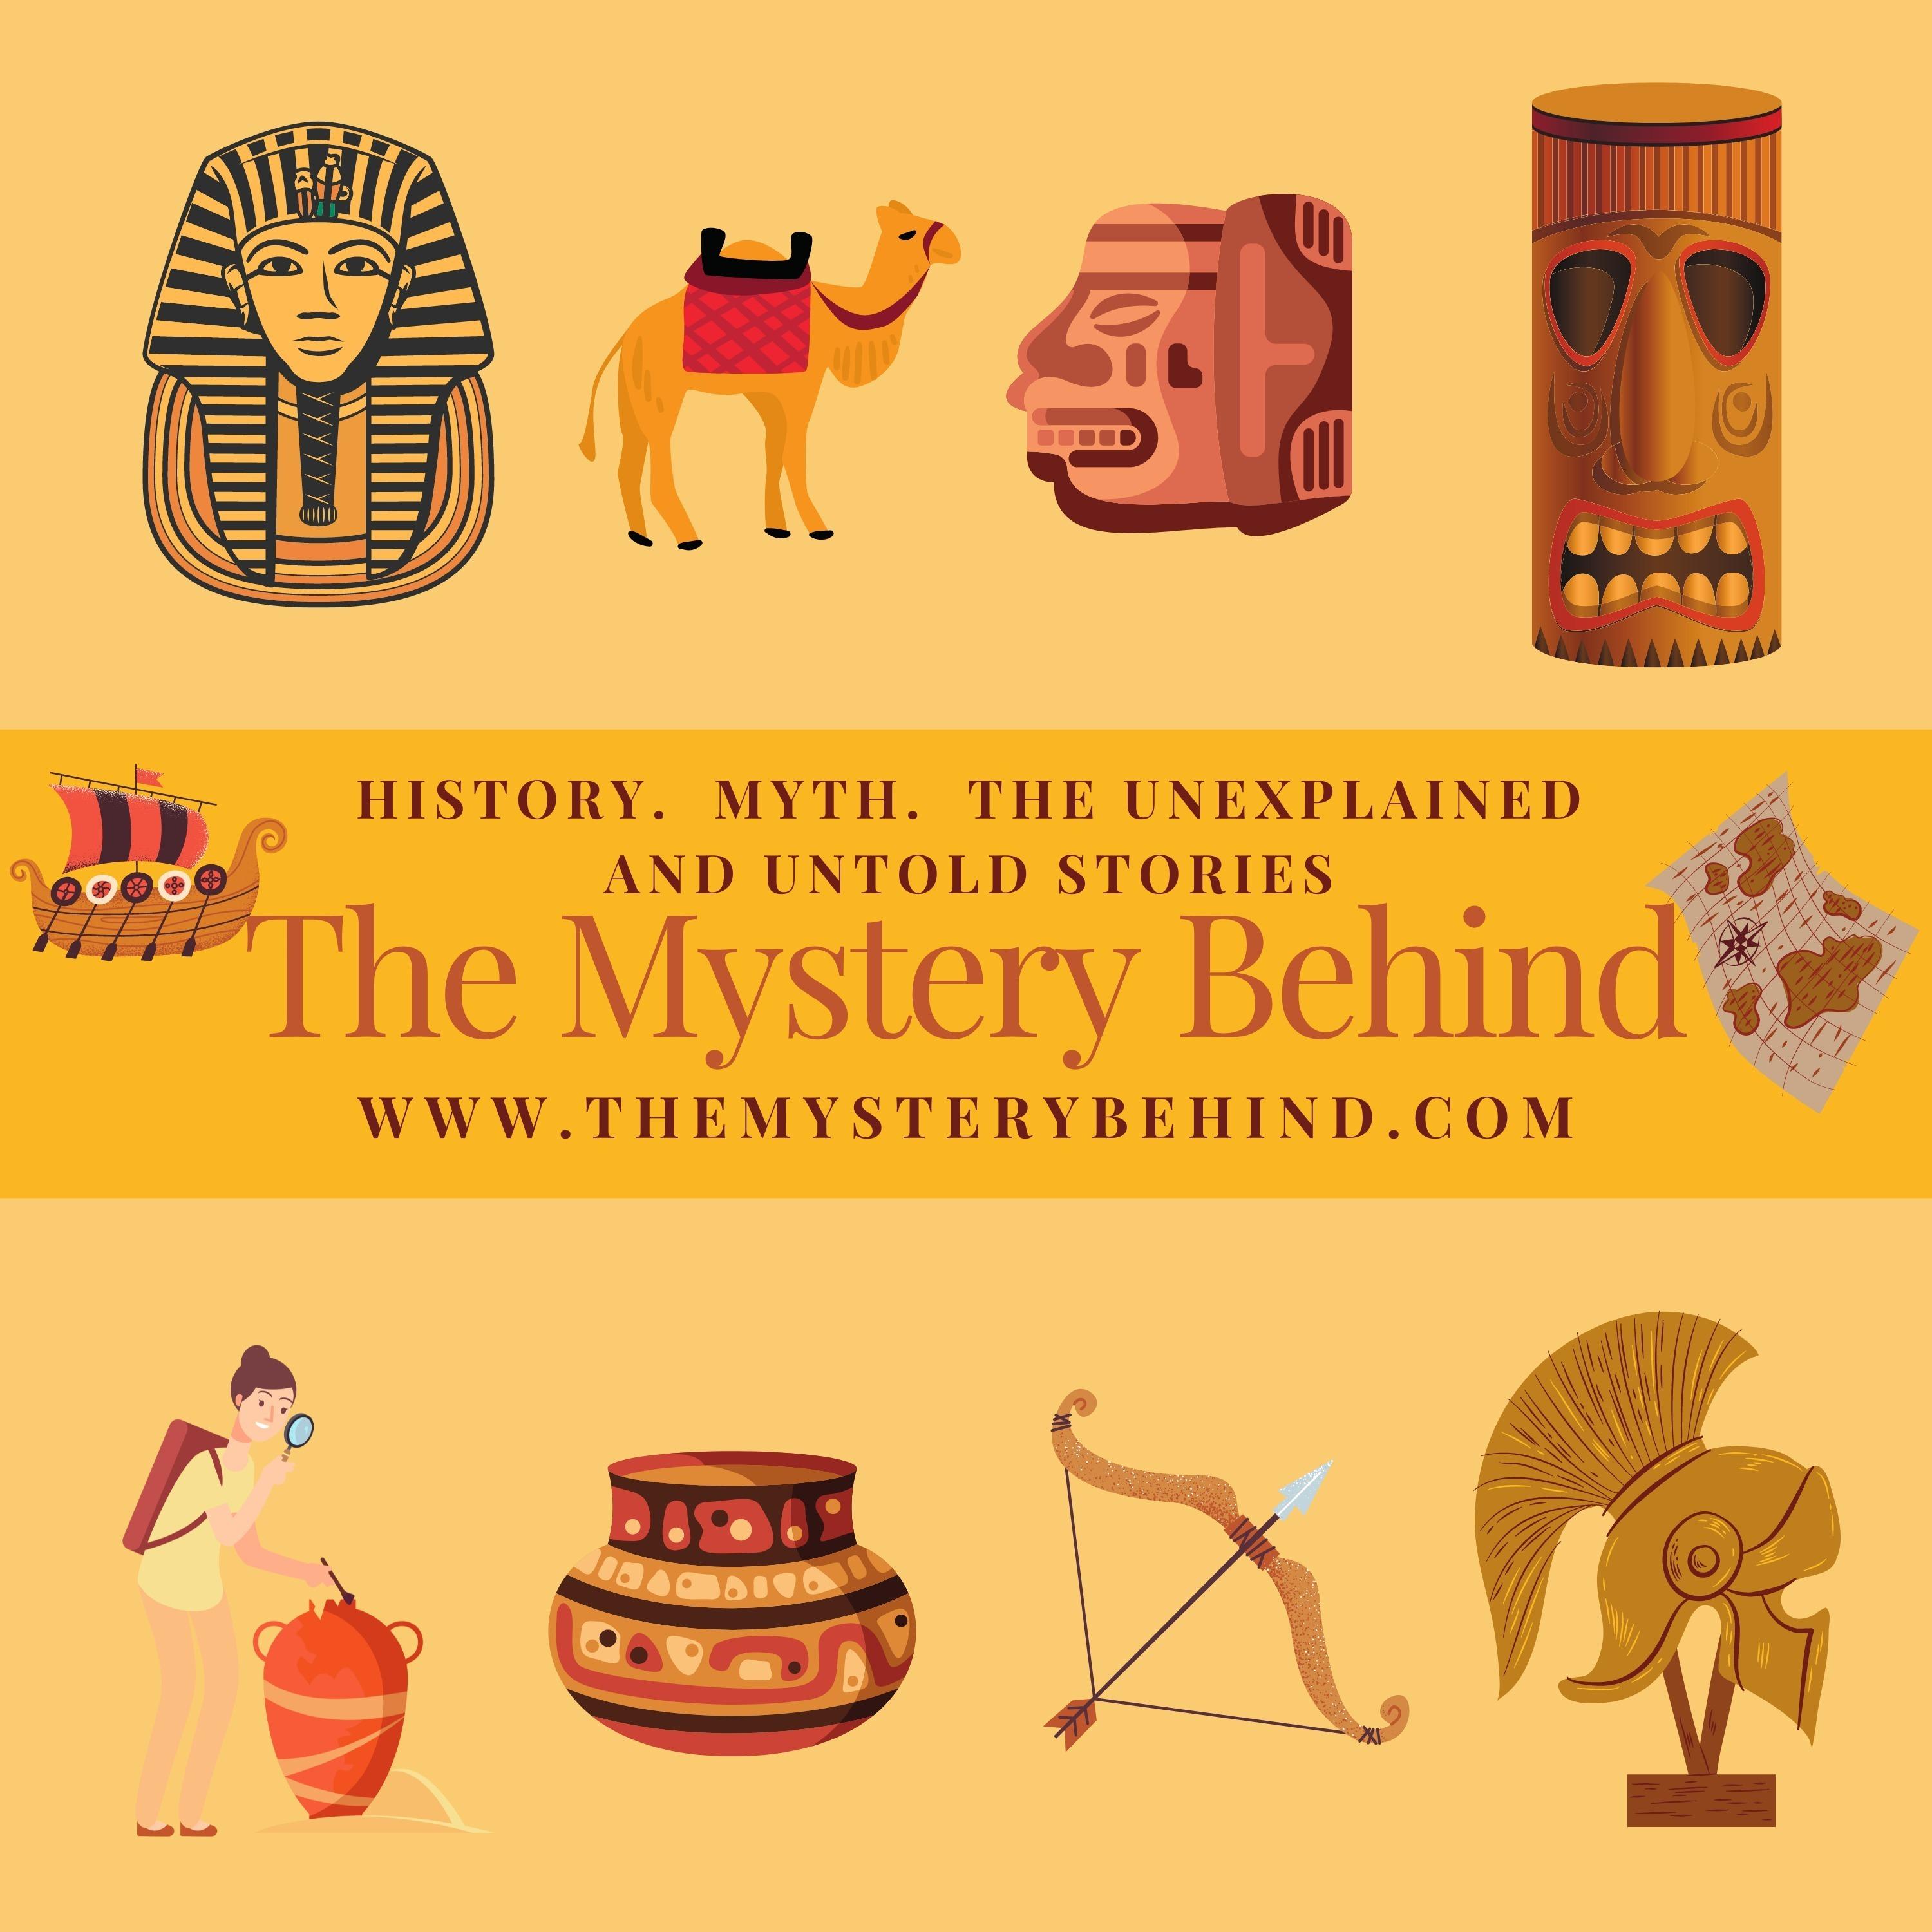 The Mystery Behind-History. Mystery. The Unexplained!